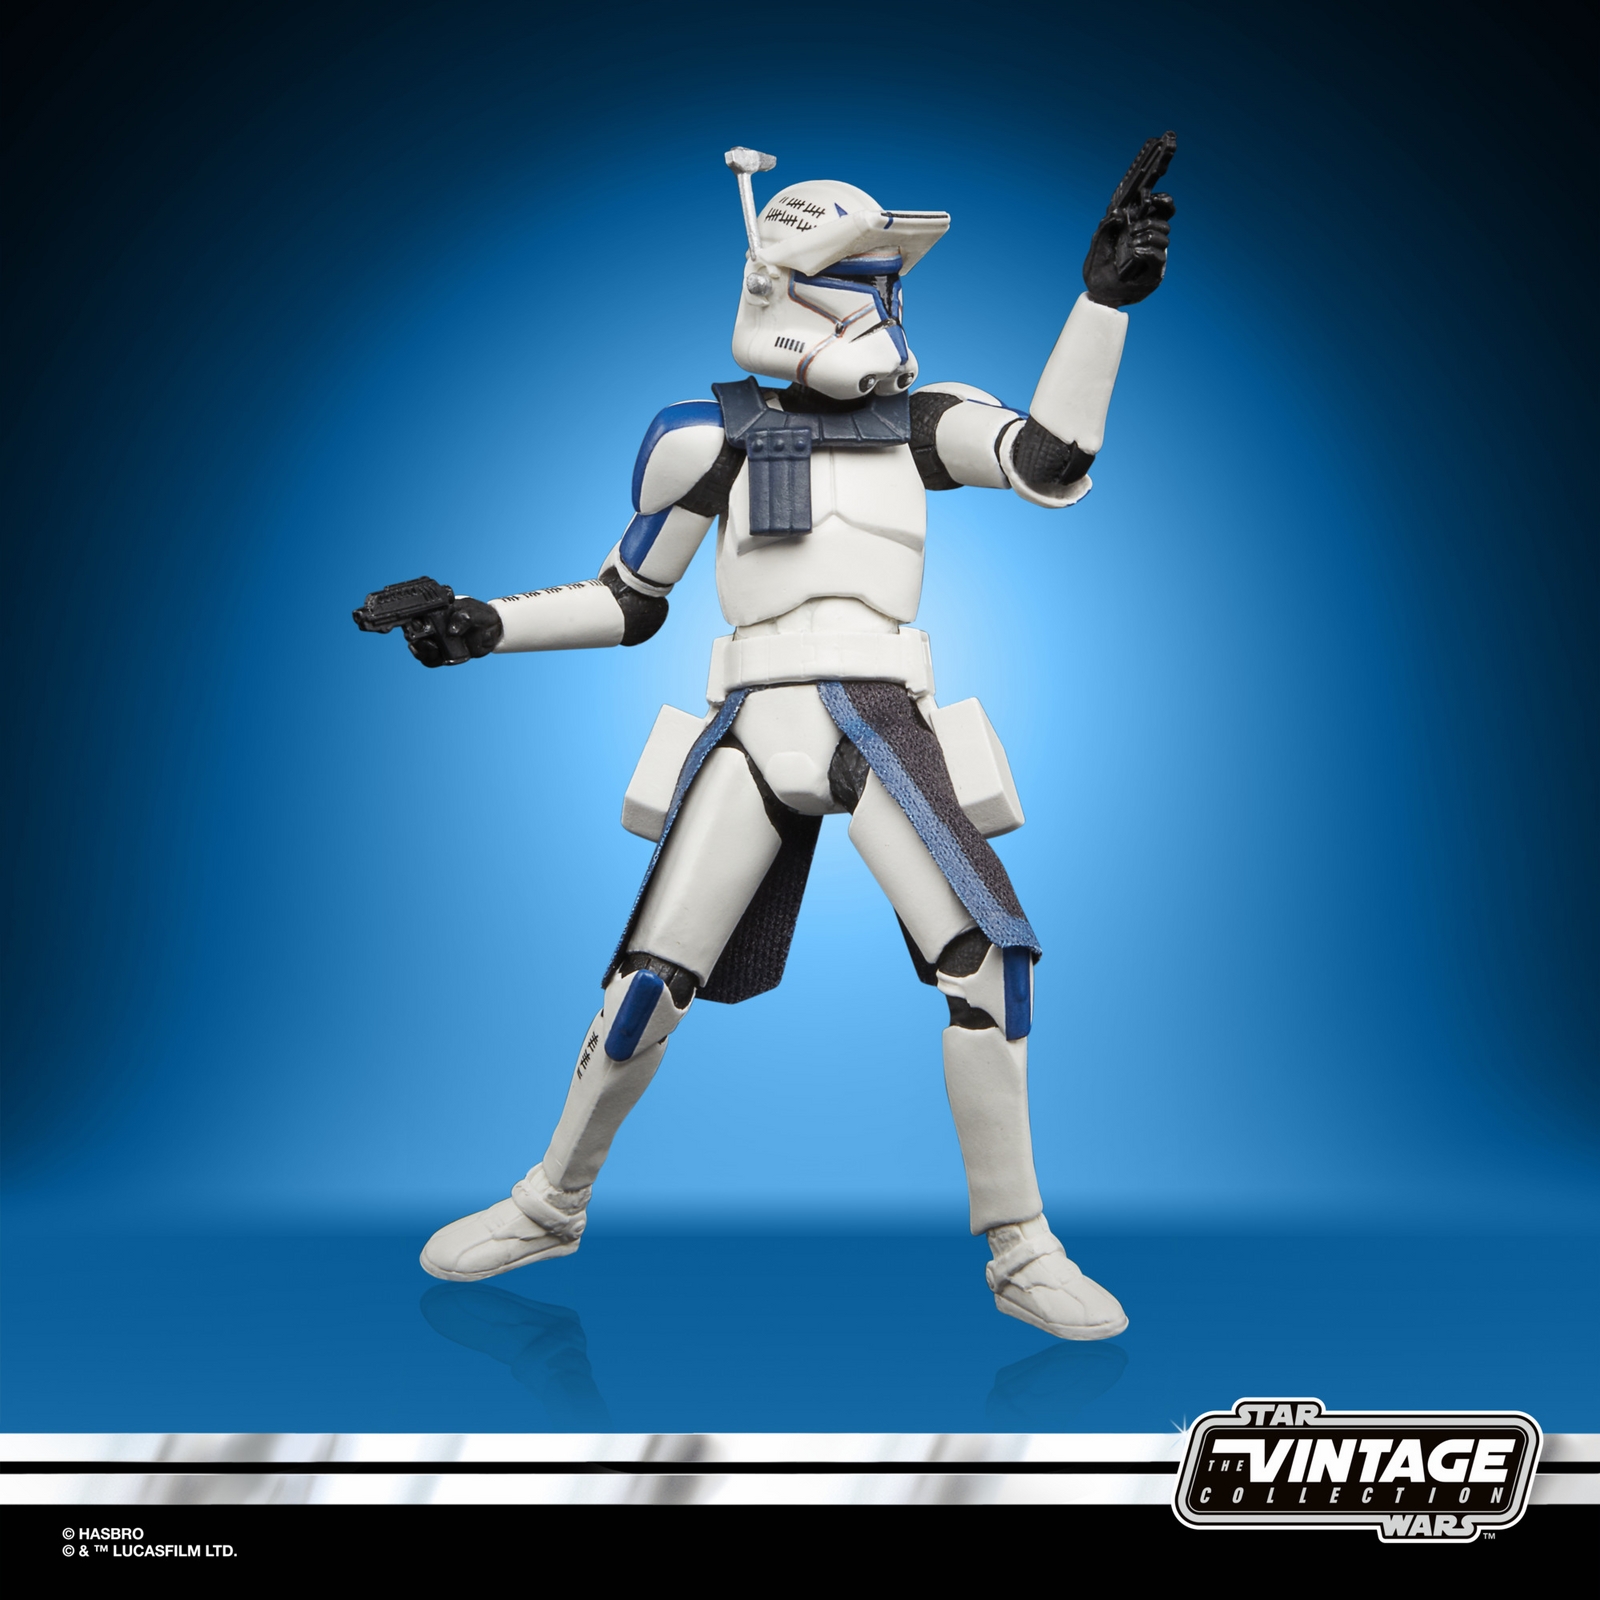 STAR WARS THE VINTAGE COLLECTION STAR WARS THE BAD BATCH Figure 4-Pack - CLONE CAPTAIN REX (2).jpg